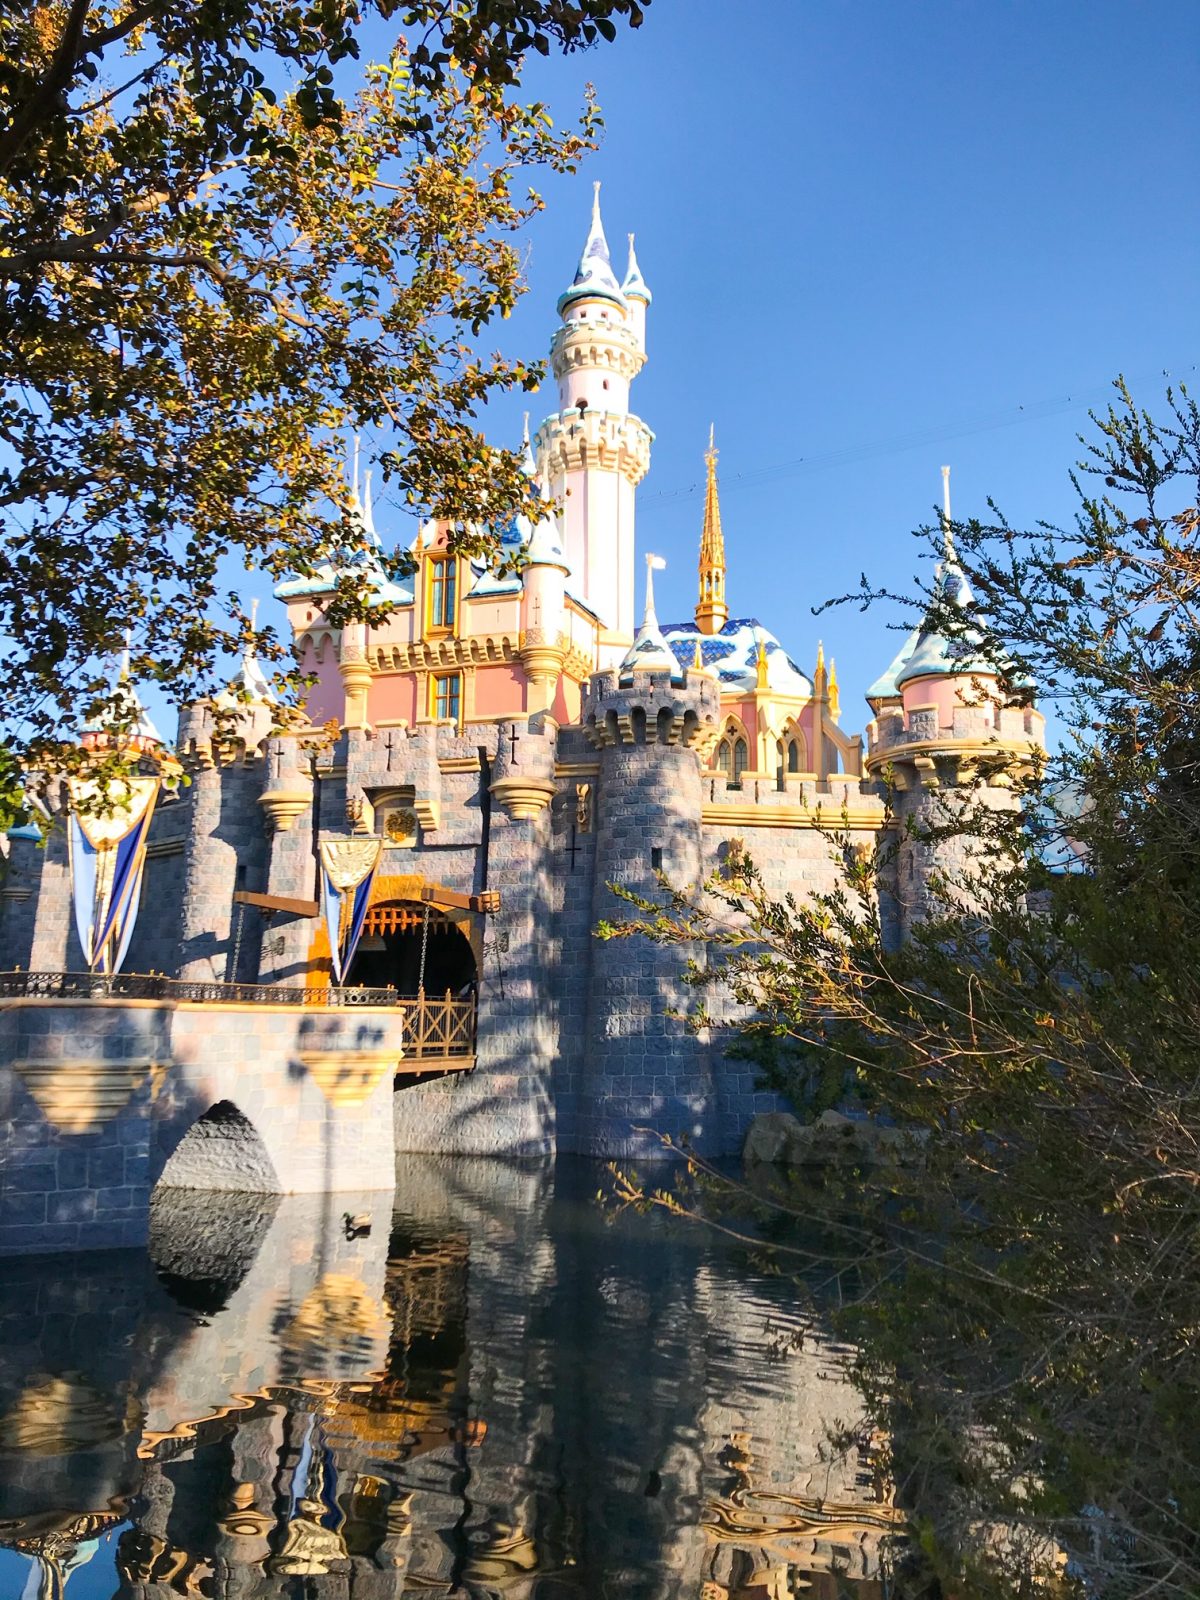 A shot of the castle as a thing to do at Disneyland